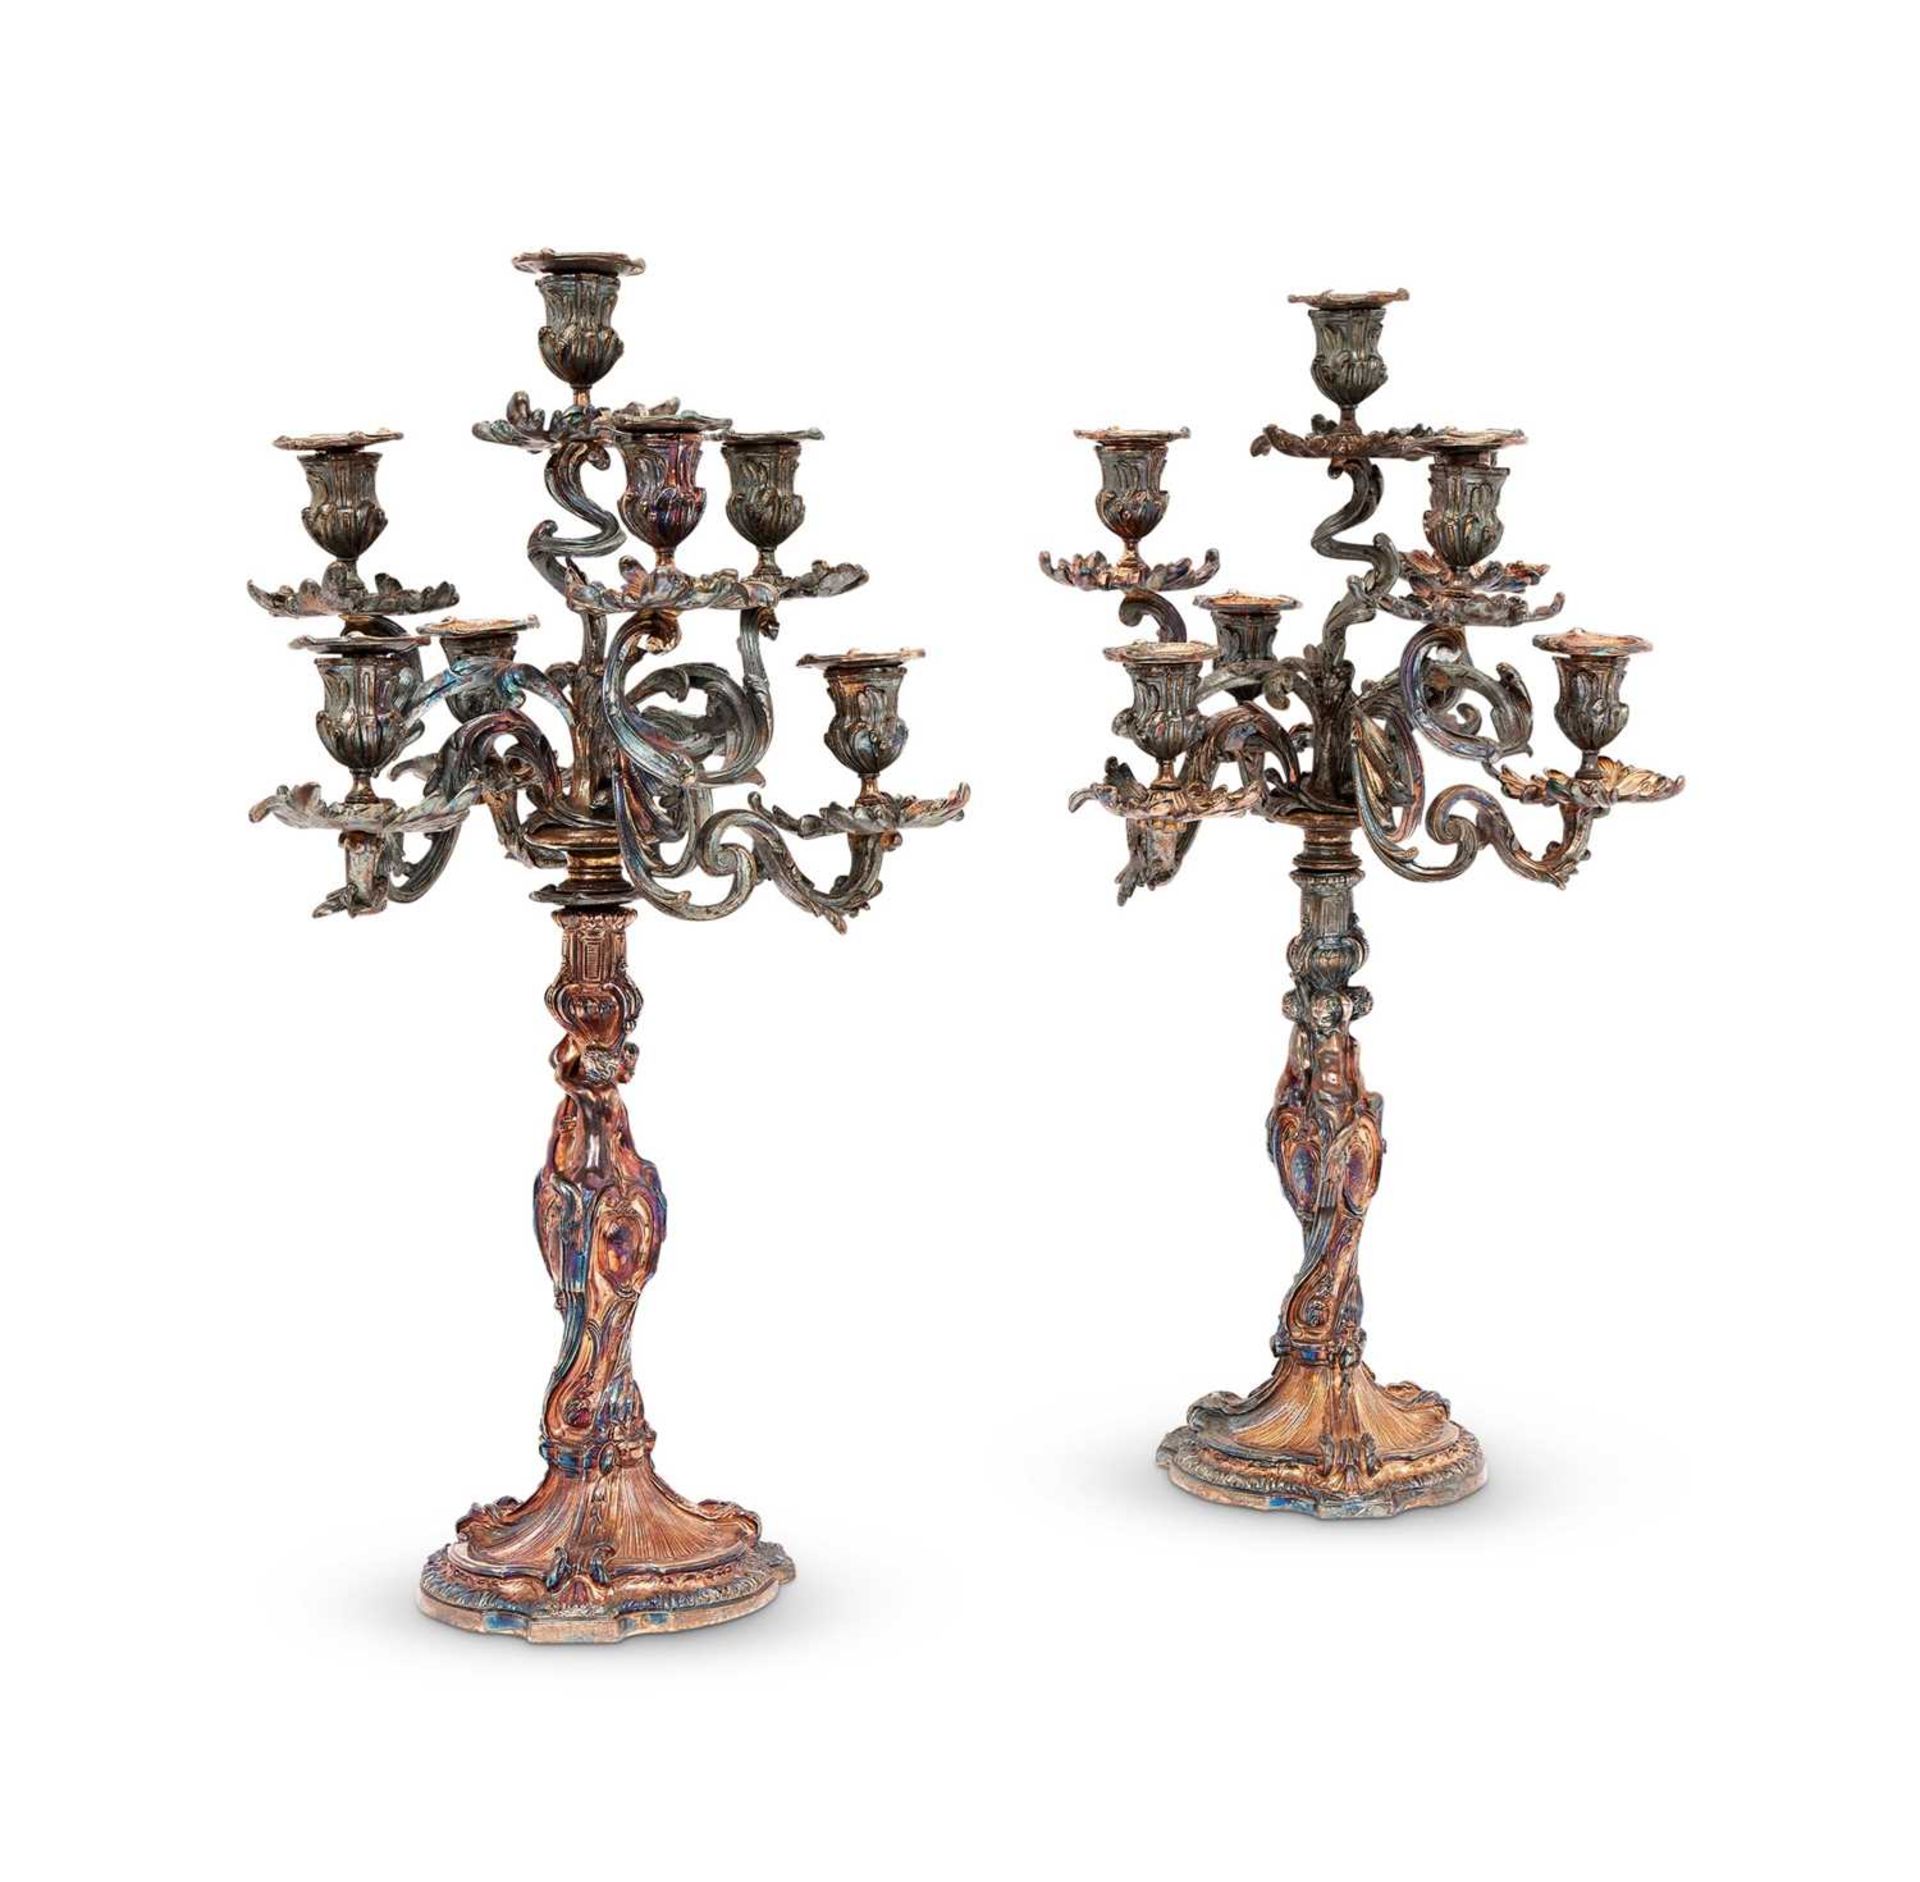 AFTER JUSTE-AURELE MEISSONNIER (1695-1750): A PAIR OF 19TH CENTURY SILVERED BRONZE CANDELABRA - Image 2 of 3